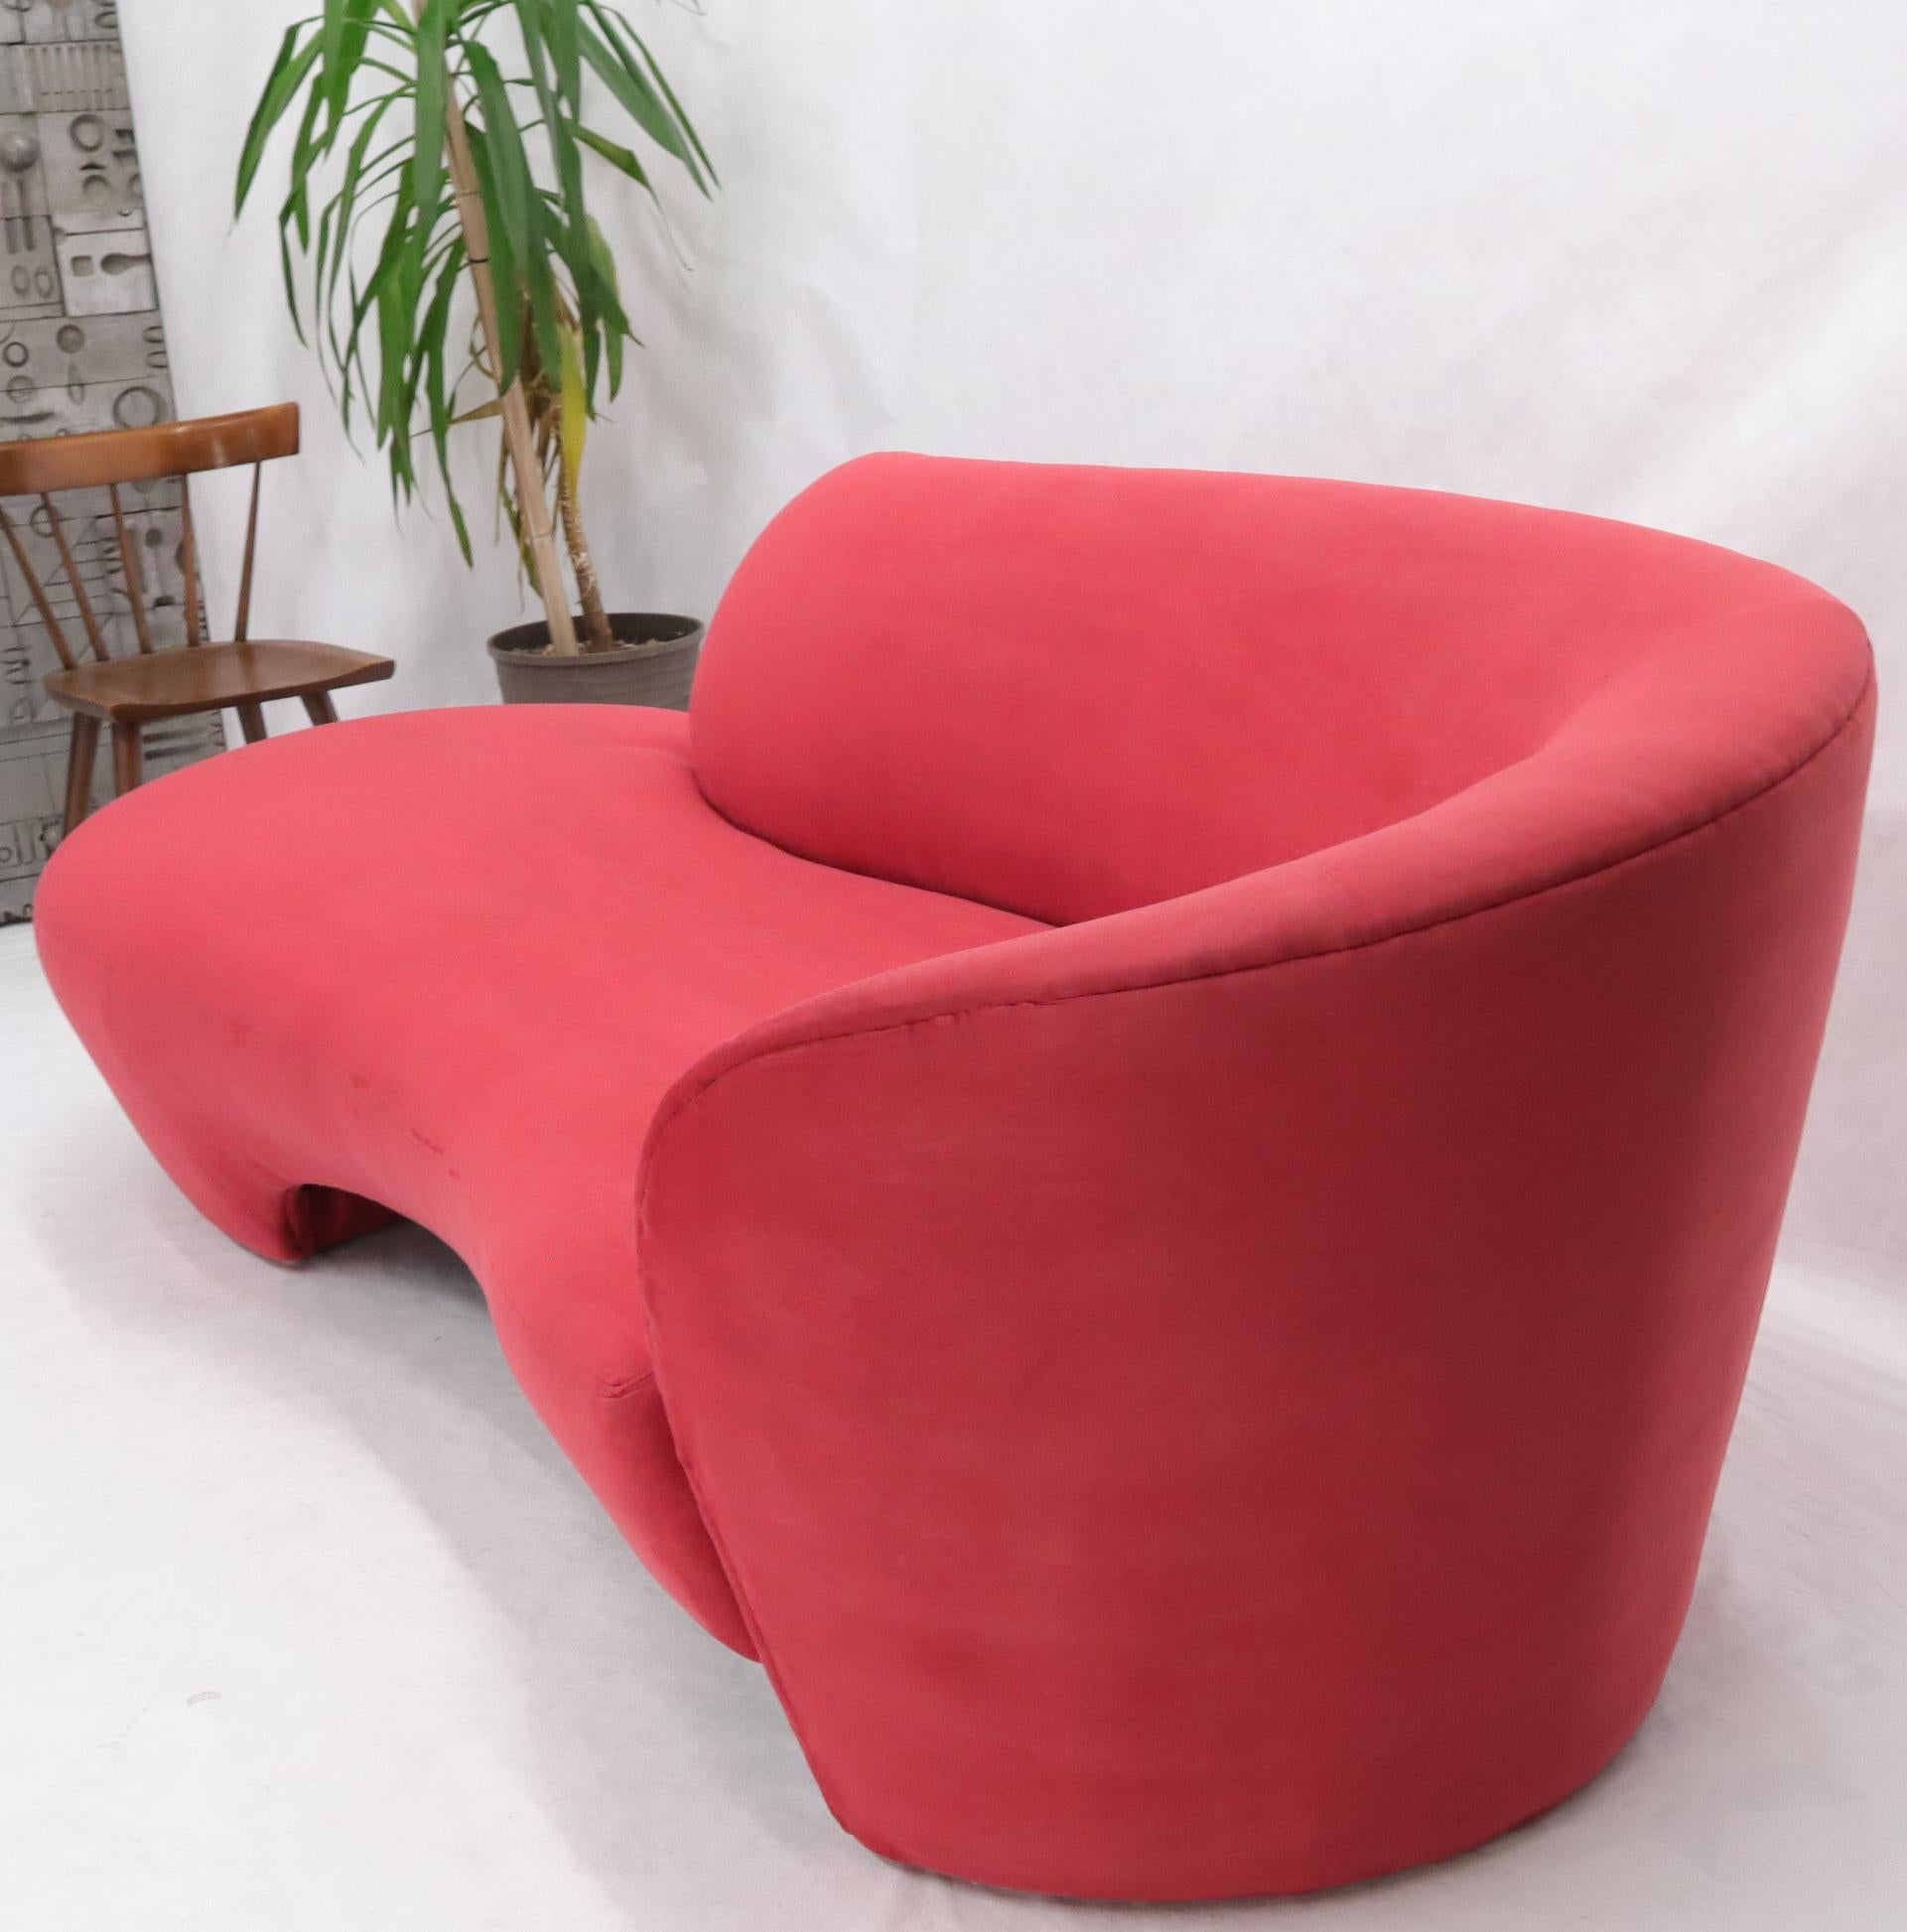 American Red Suede Weiman Preview Chaise Lounge Cloud Sofa For Sale